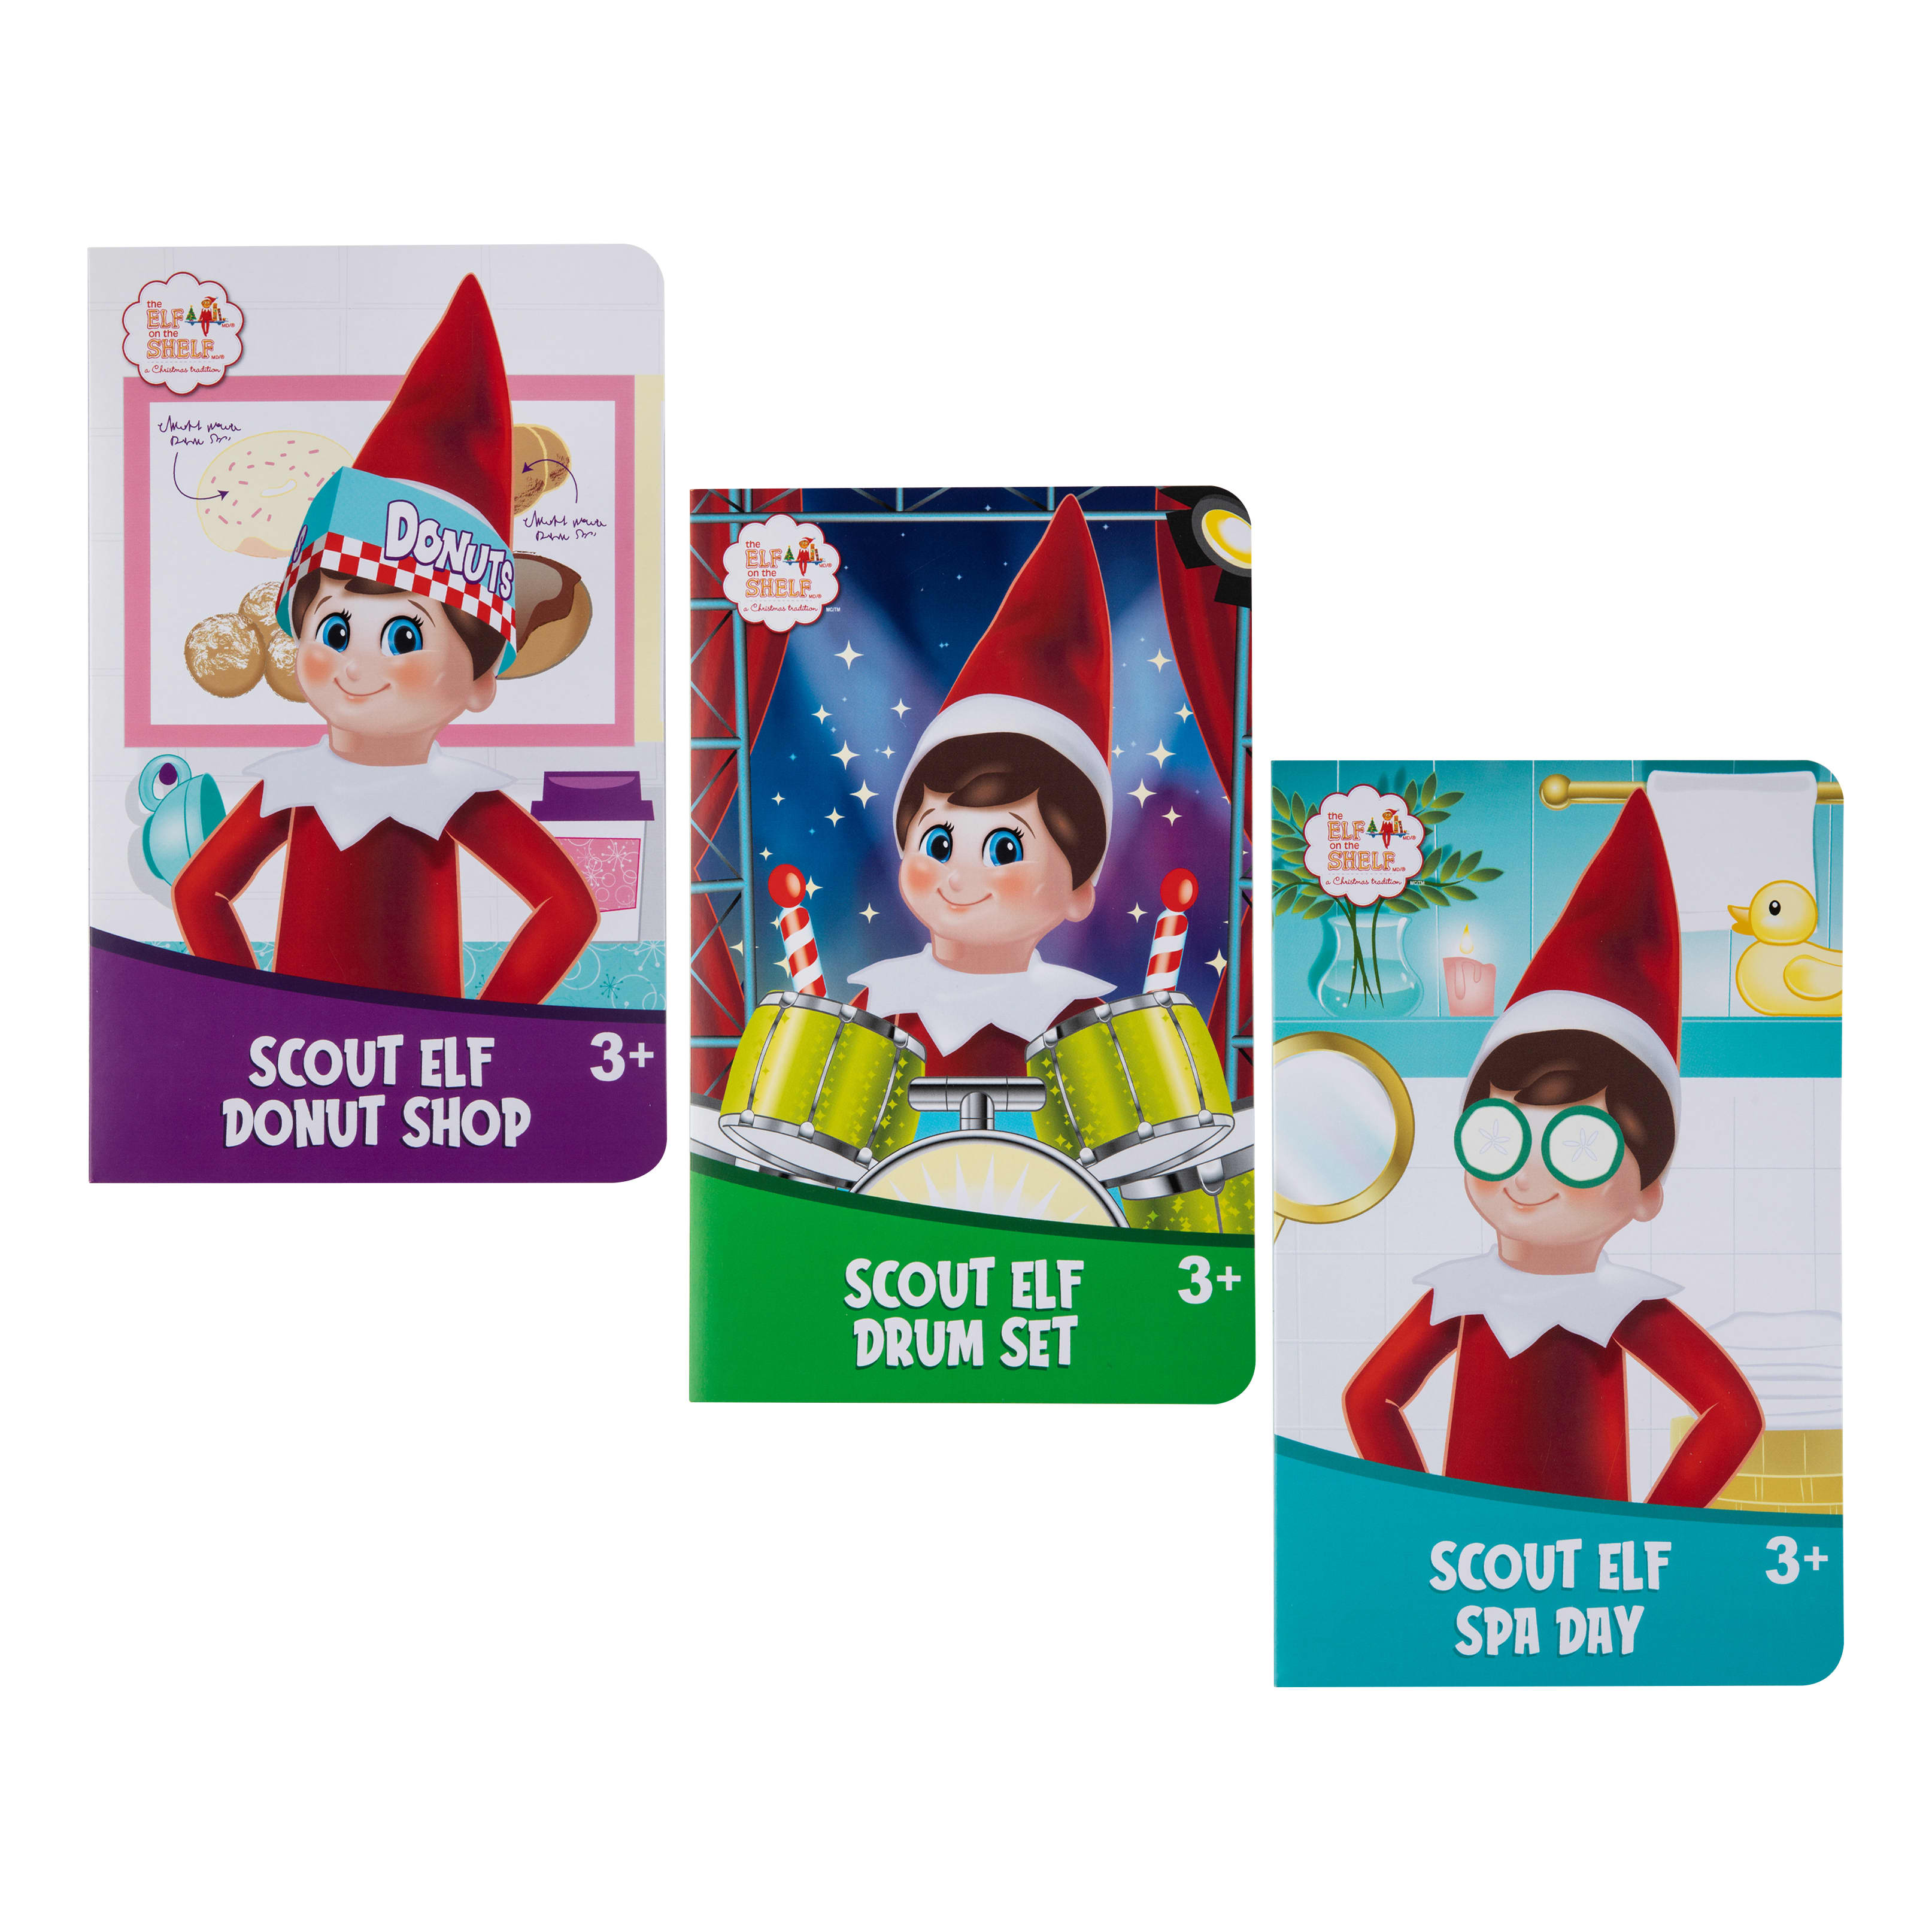 Elf on the Shelf Scout Elves at Play® Insta-Moment Pop-Ups - Series 2 ...